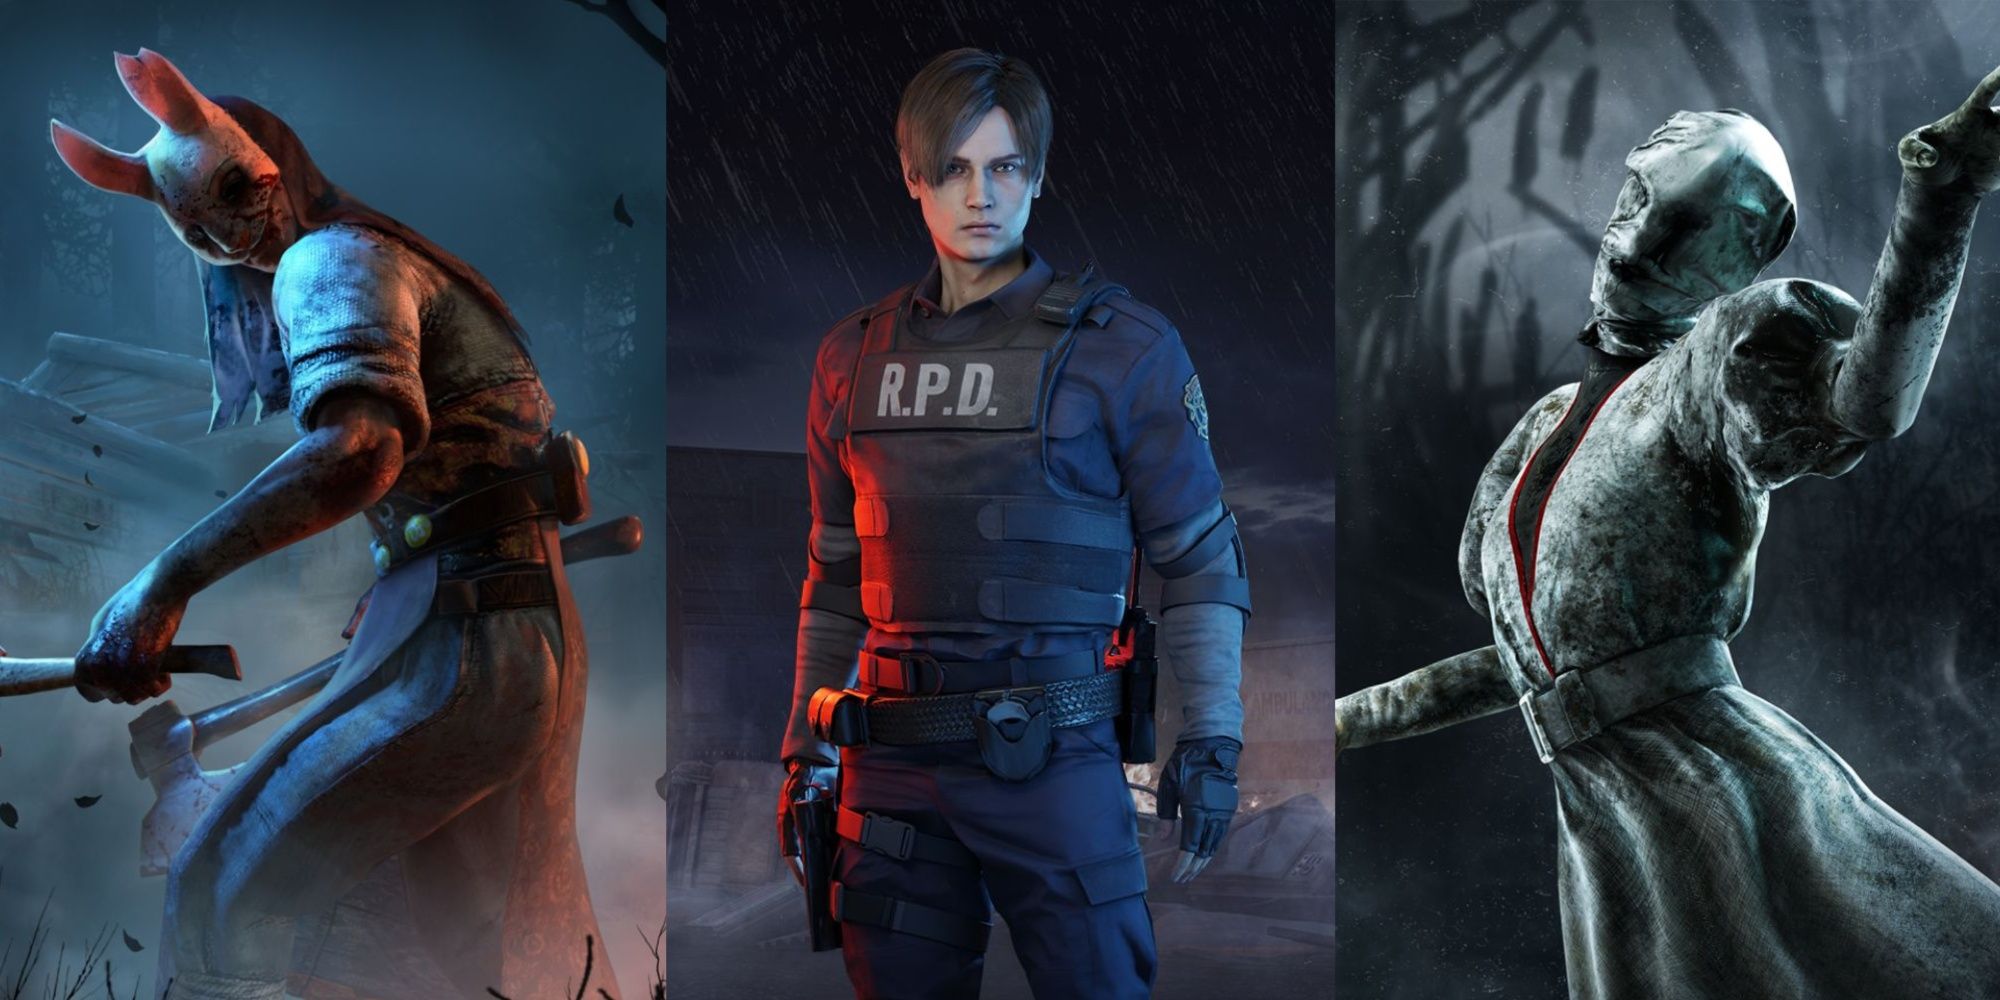 The Huntress, Leon Kennedy and The Nurse from Dead by Daylight